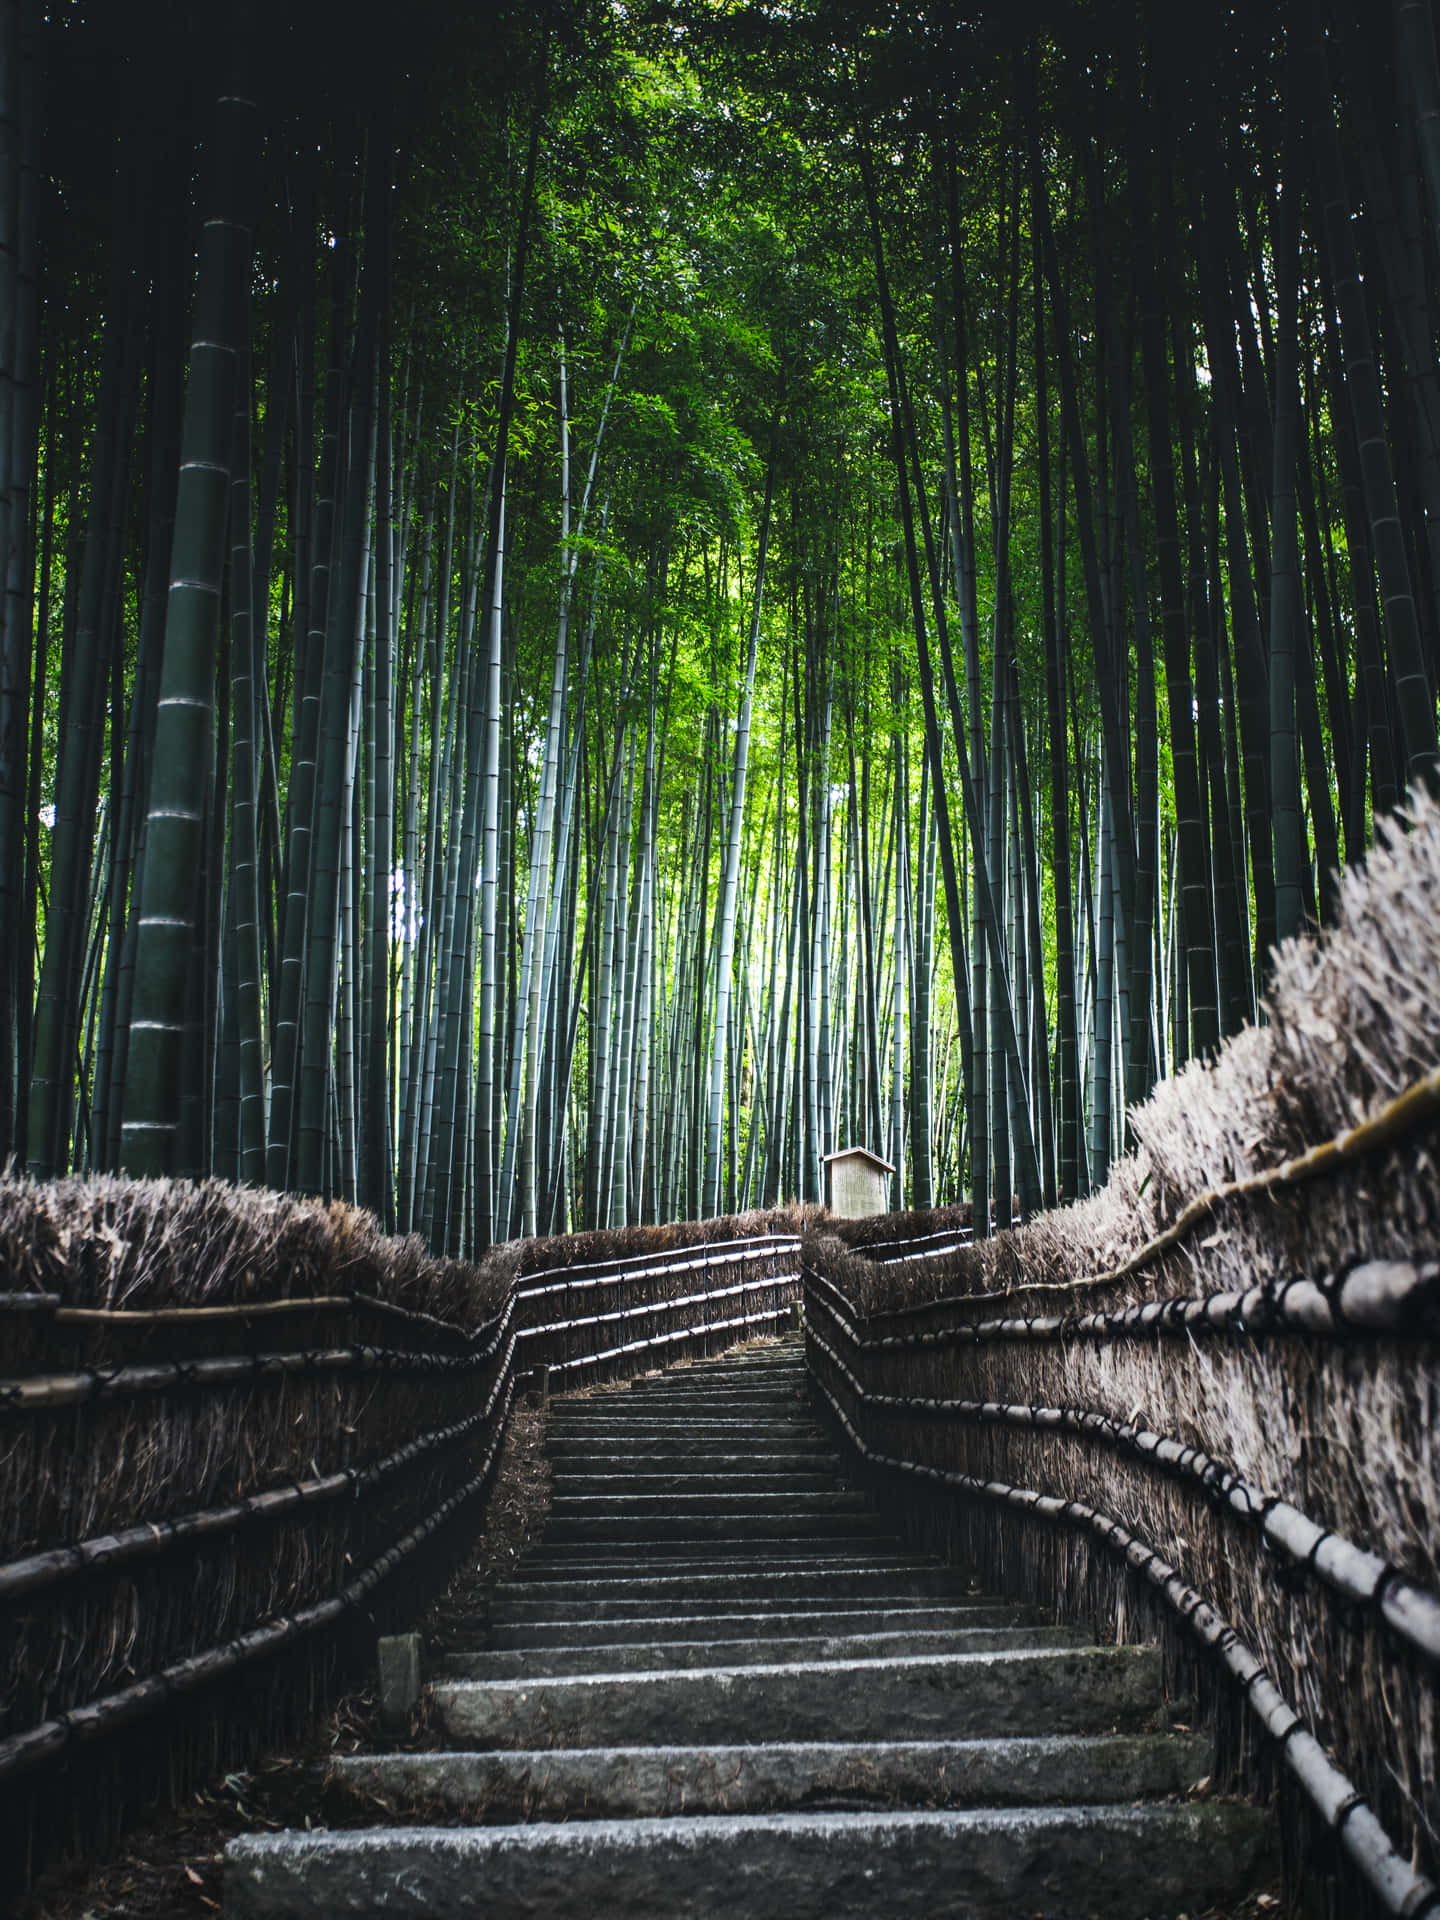 Bamboo Forest Staircase Pathway Background